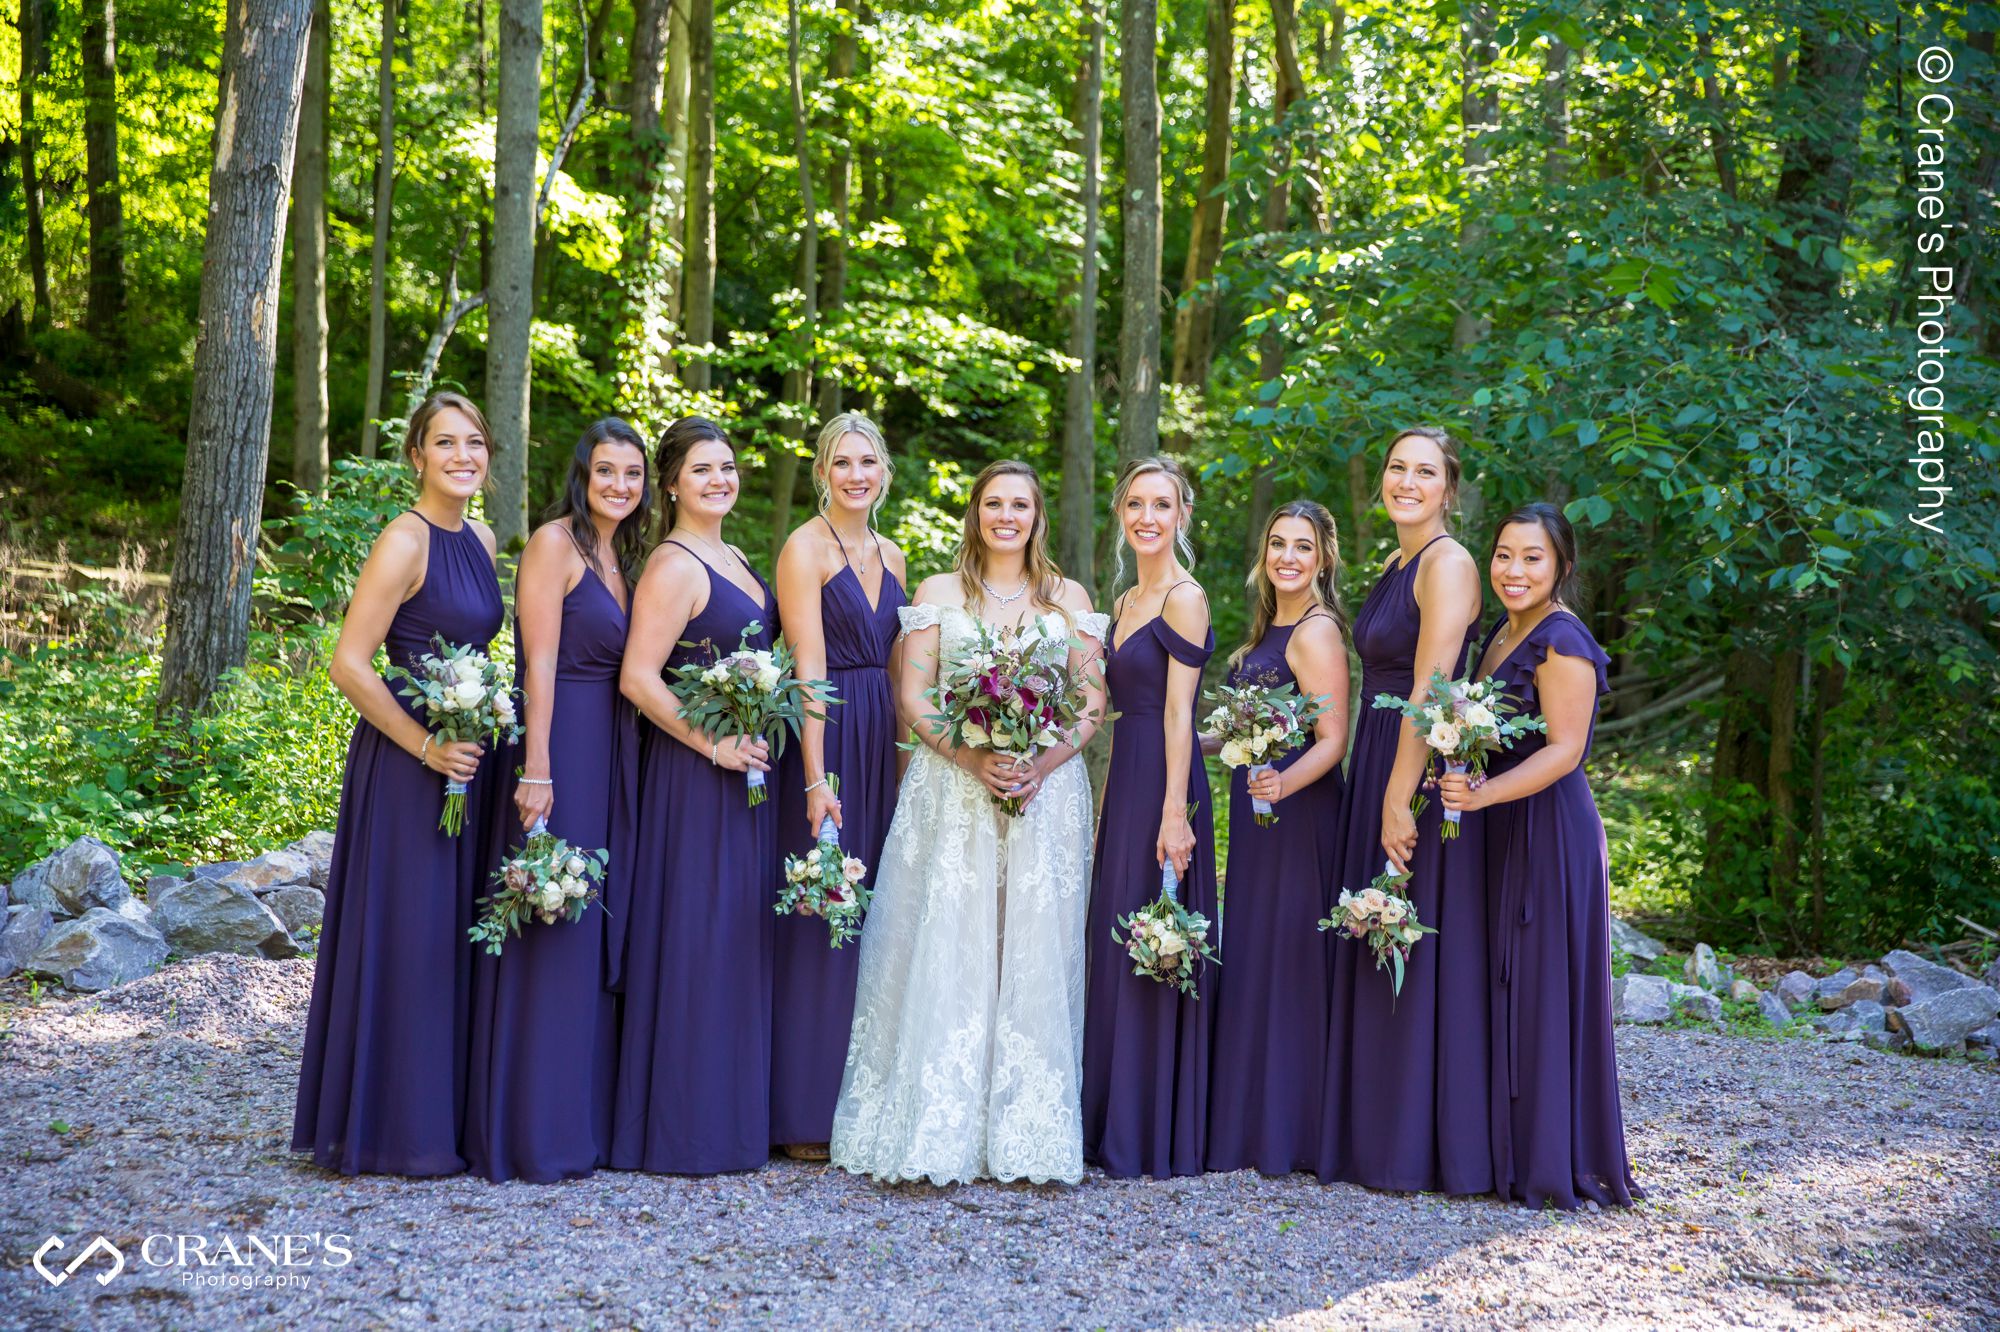 Bridal party photo at The Swan Barn Door with the wood in the background